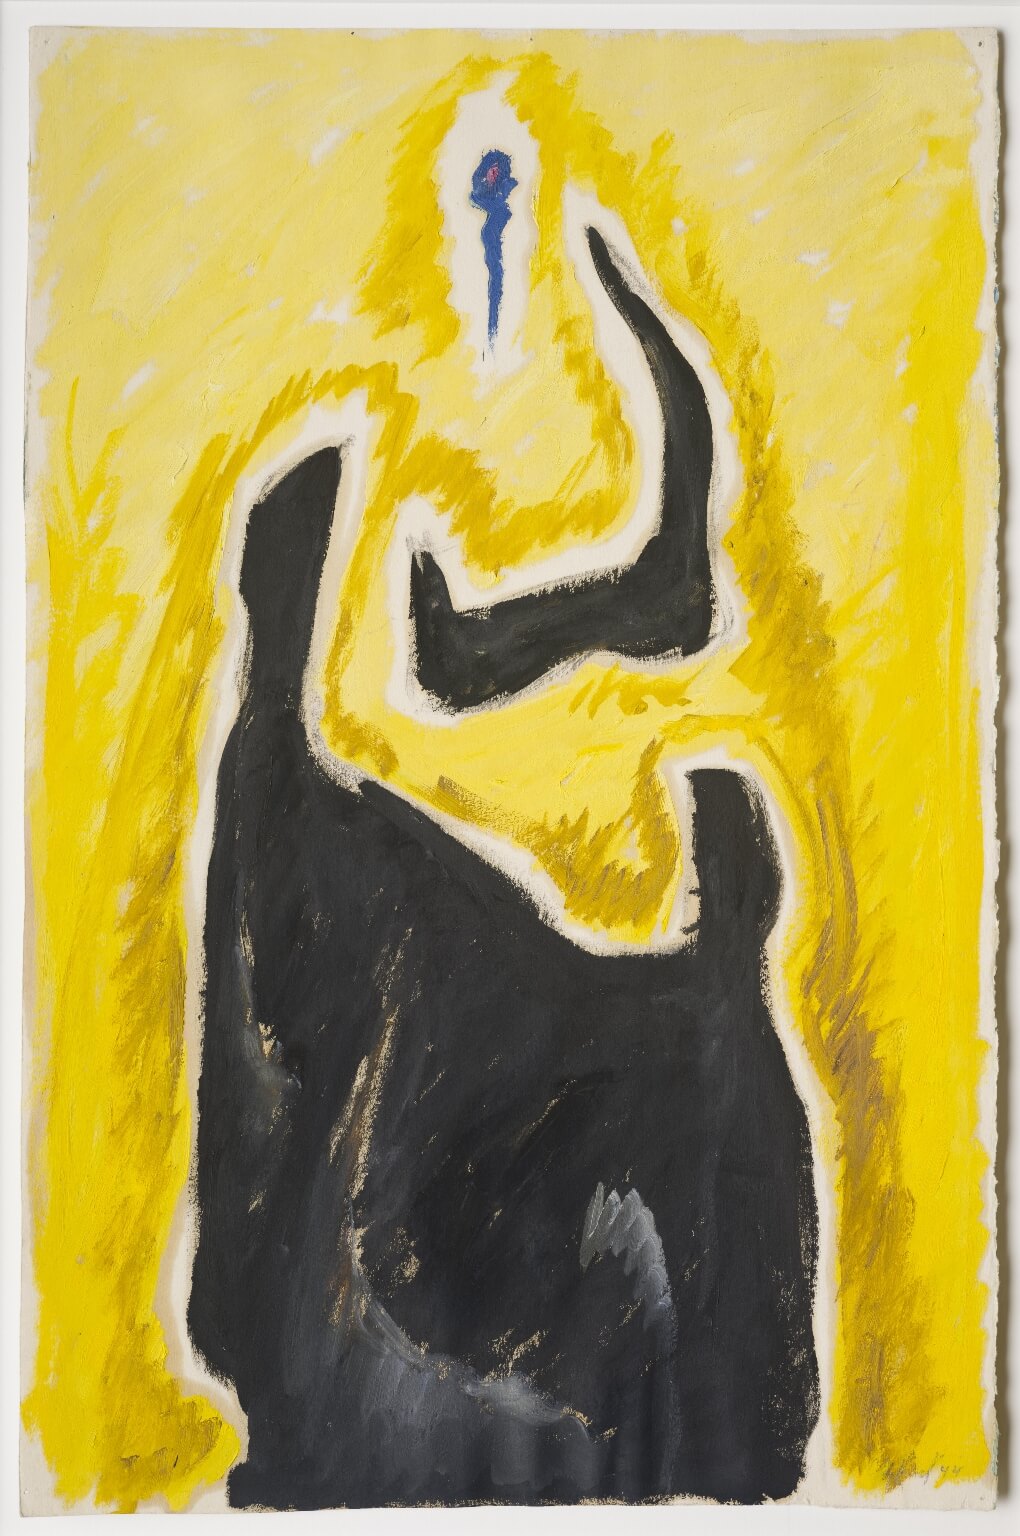 Abstract oil painting on paper with two shades of yellow and black abstracted figures in the foreground